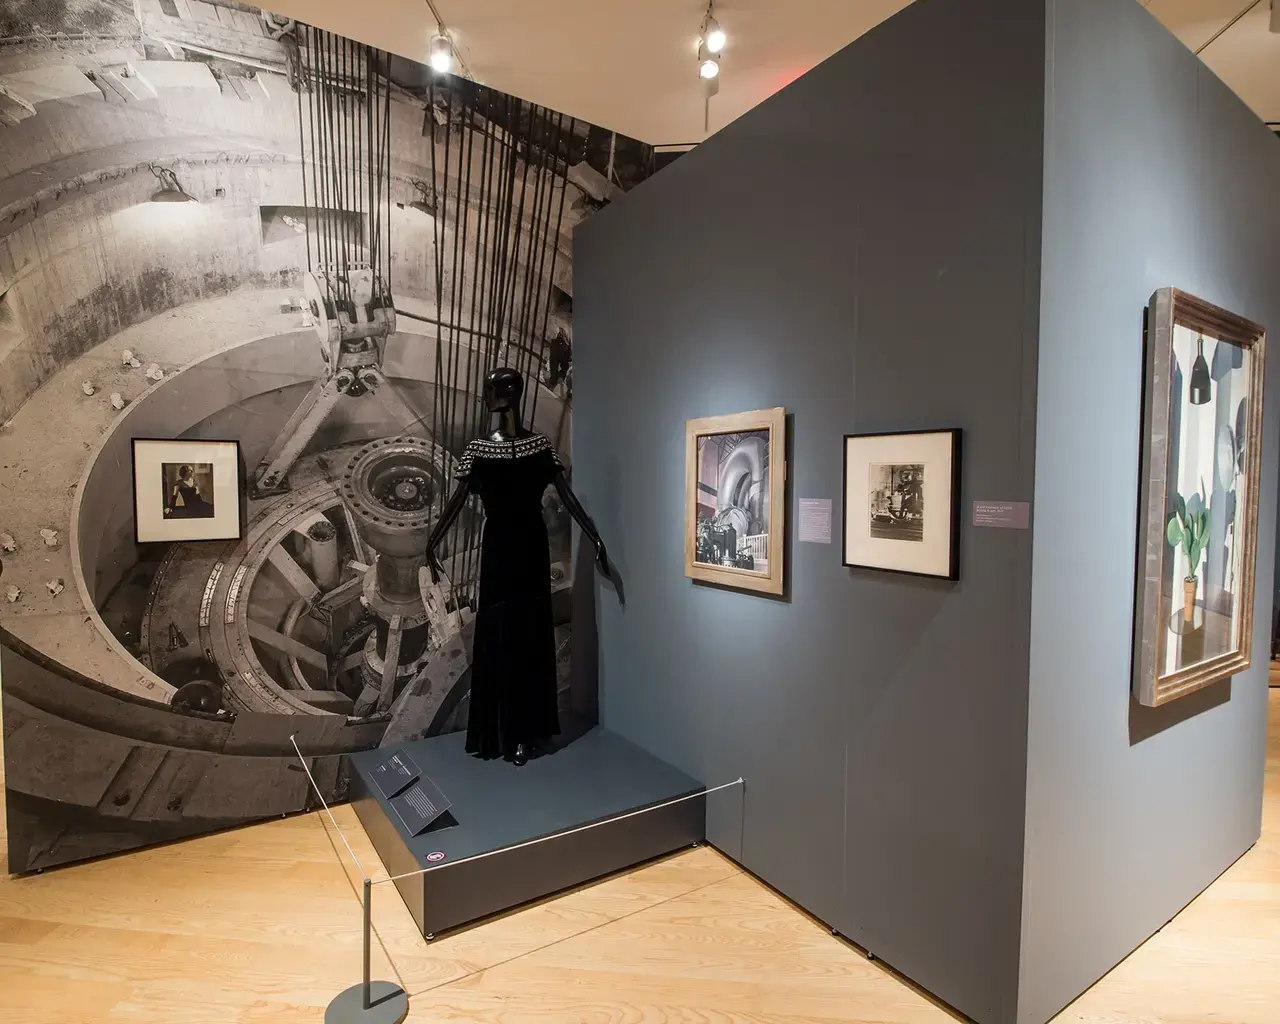 Charles Sheeler: Fashion, Photography, and Sculptural Form, installation view, James A. Michener Art Museum, 2016. Photo by Dara N. King.